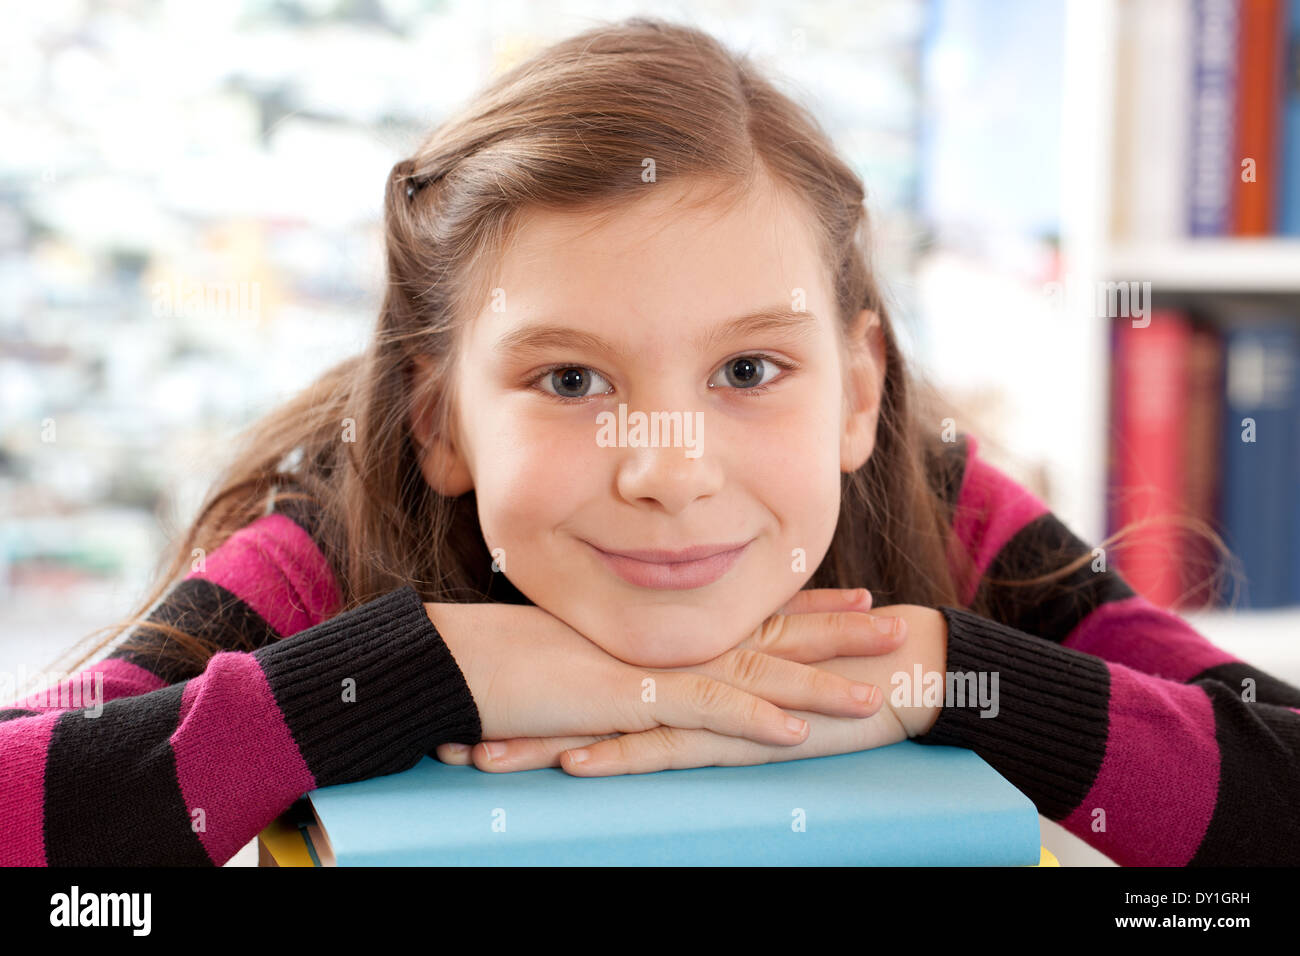 Little girl holding her head on a stack of books Stock Photo